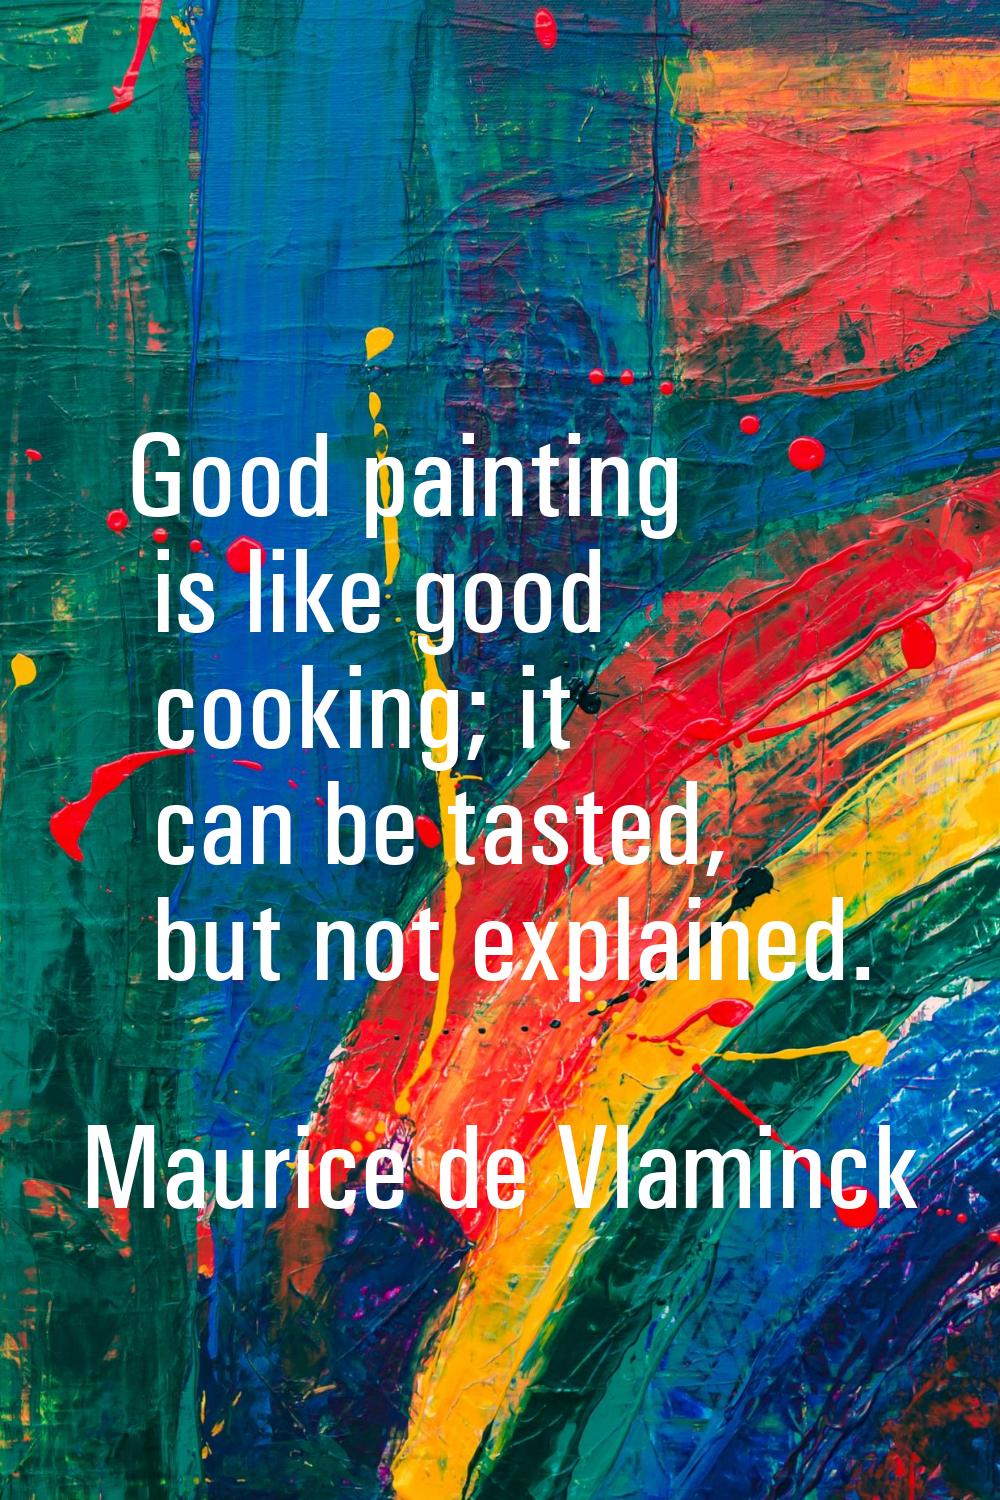 Good painting is like good cooking; it can be tasted, but not explained.